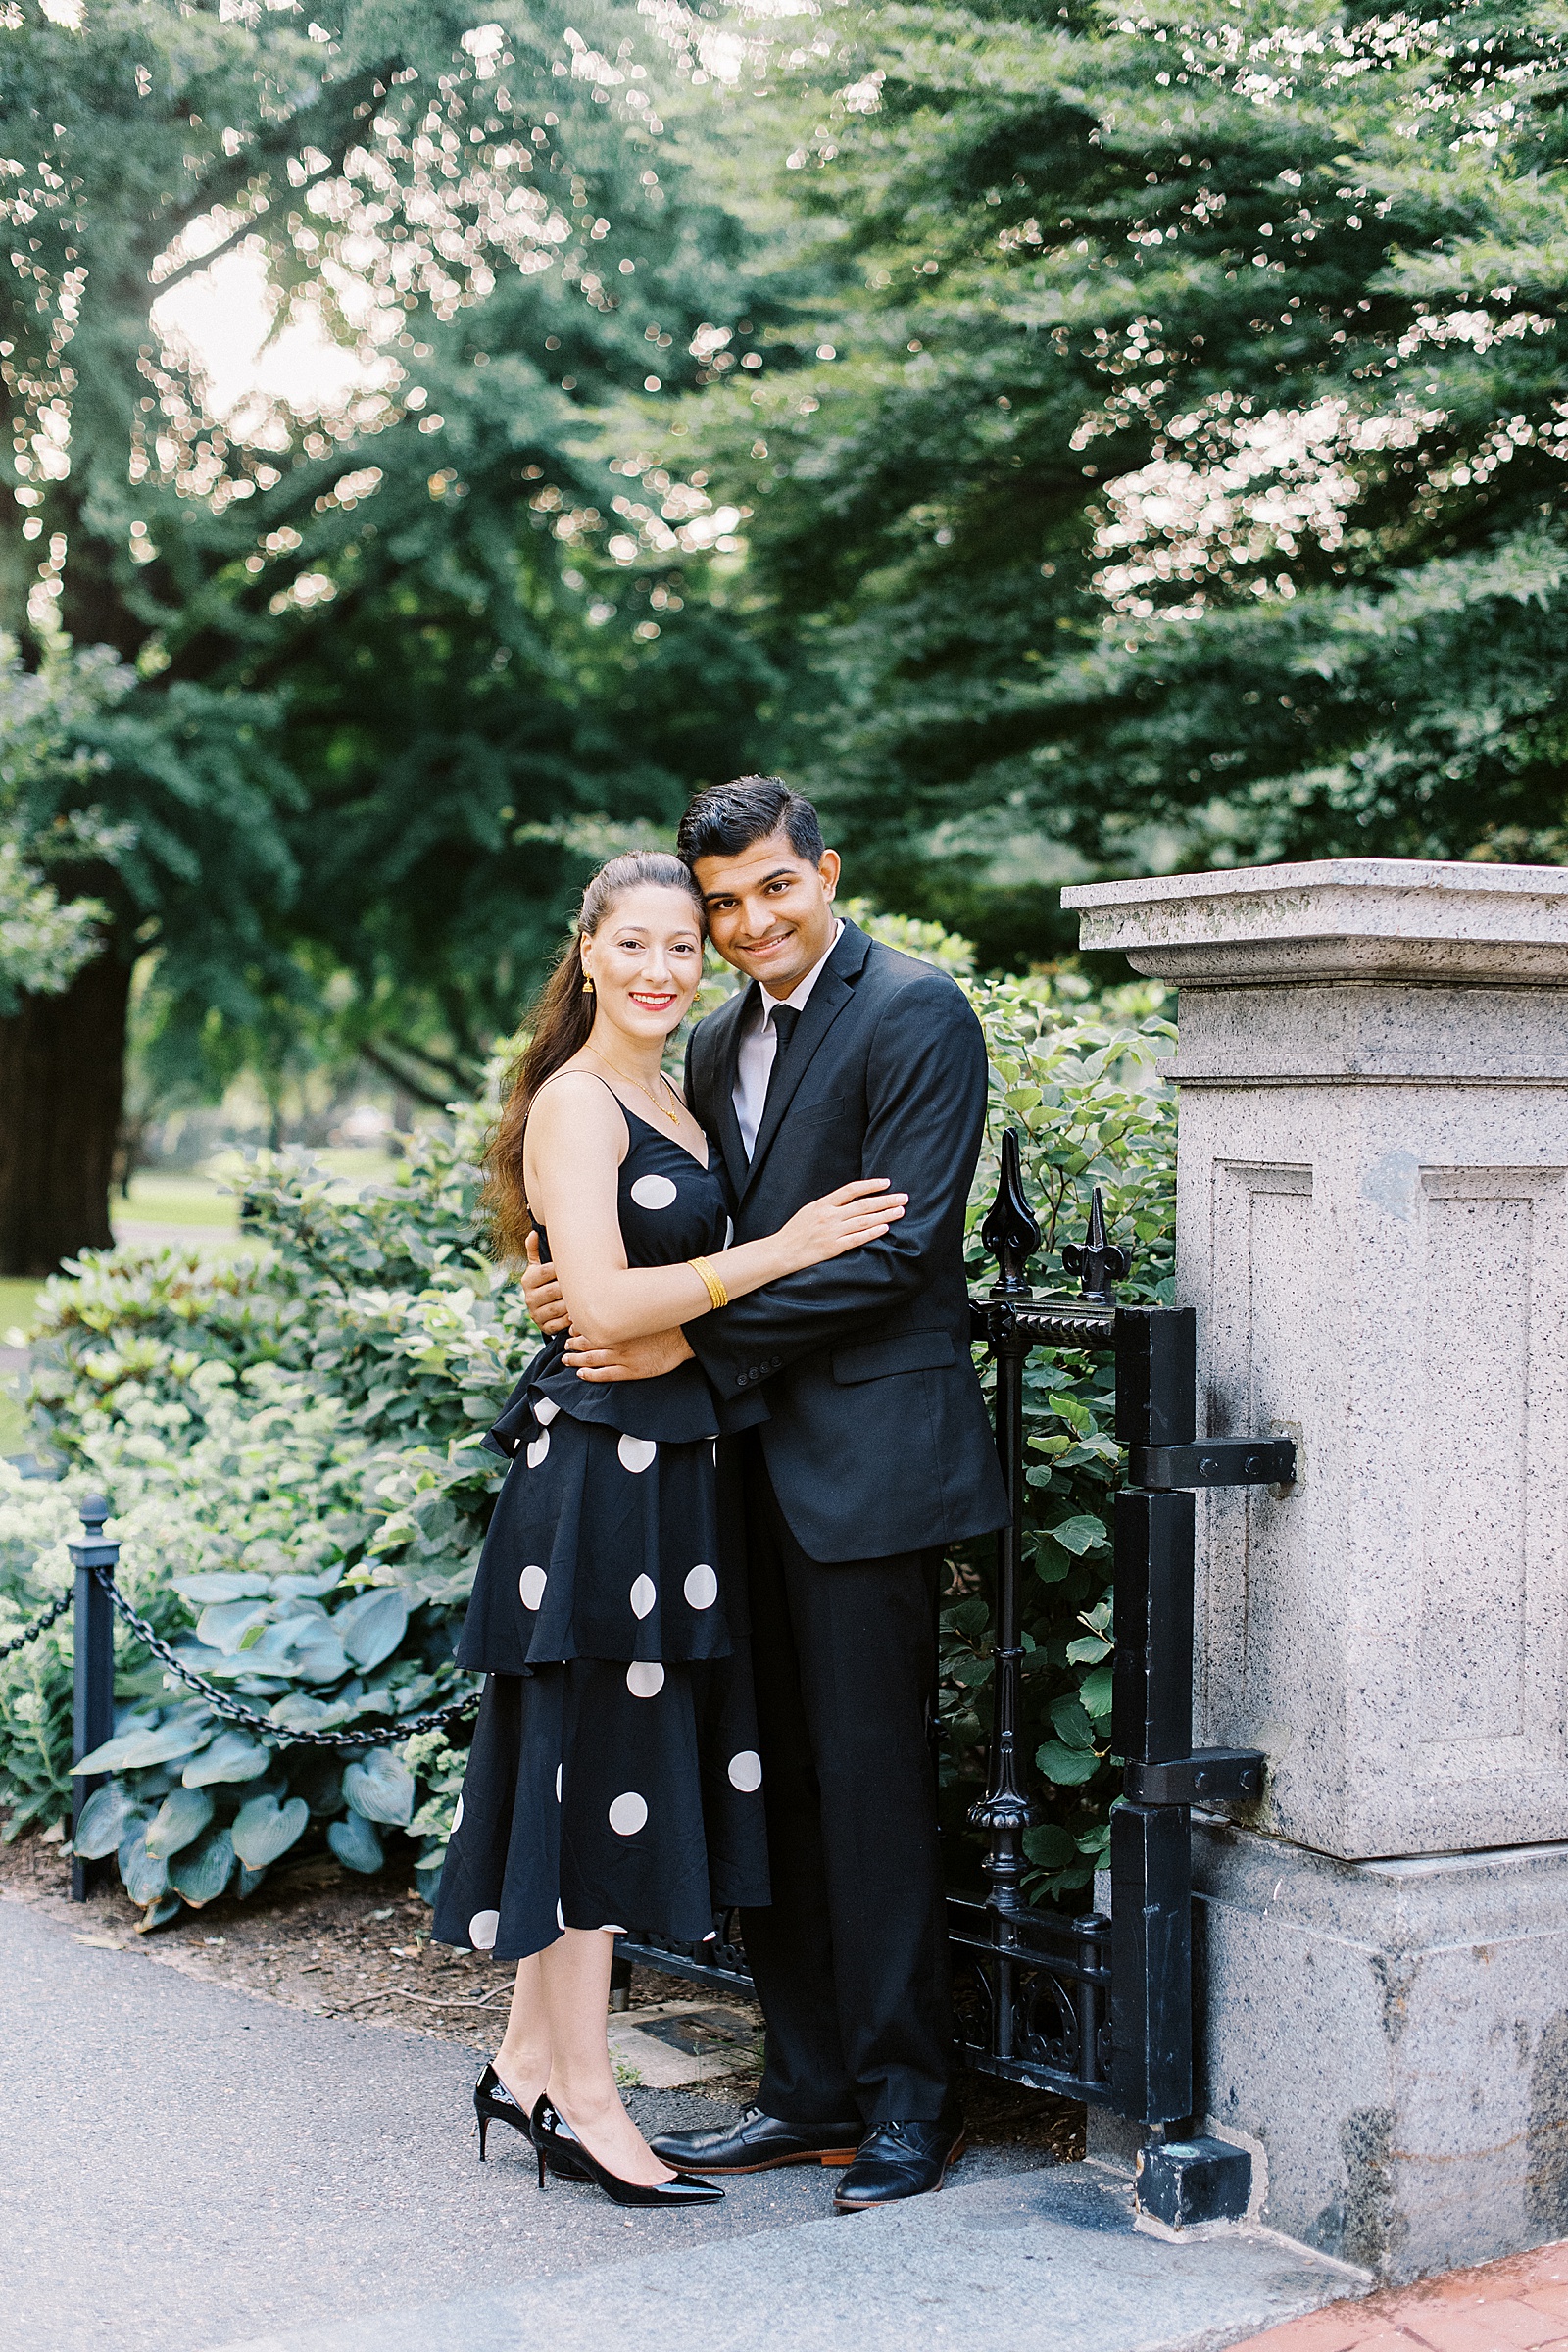 Engaged couple leaning against a garden gate by Lynne Reznick photography 